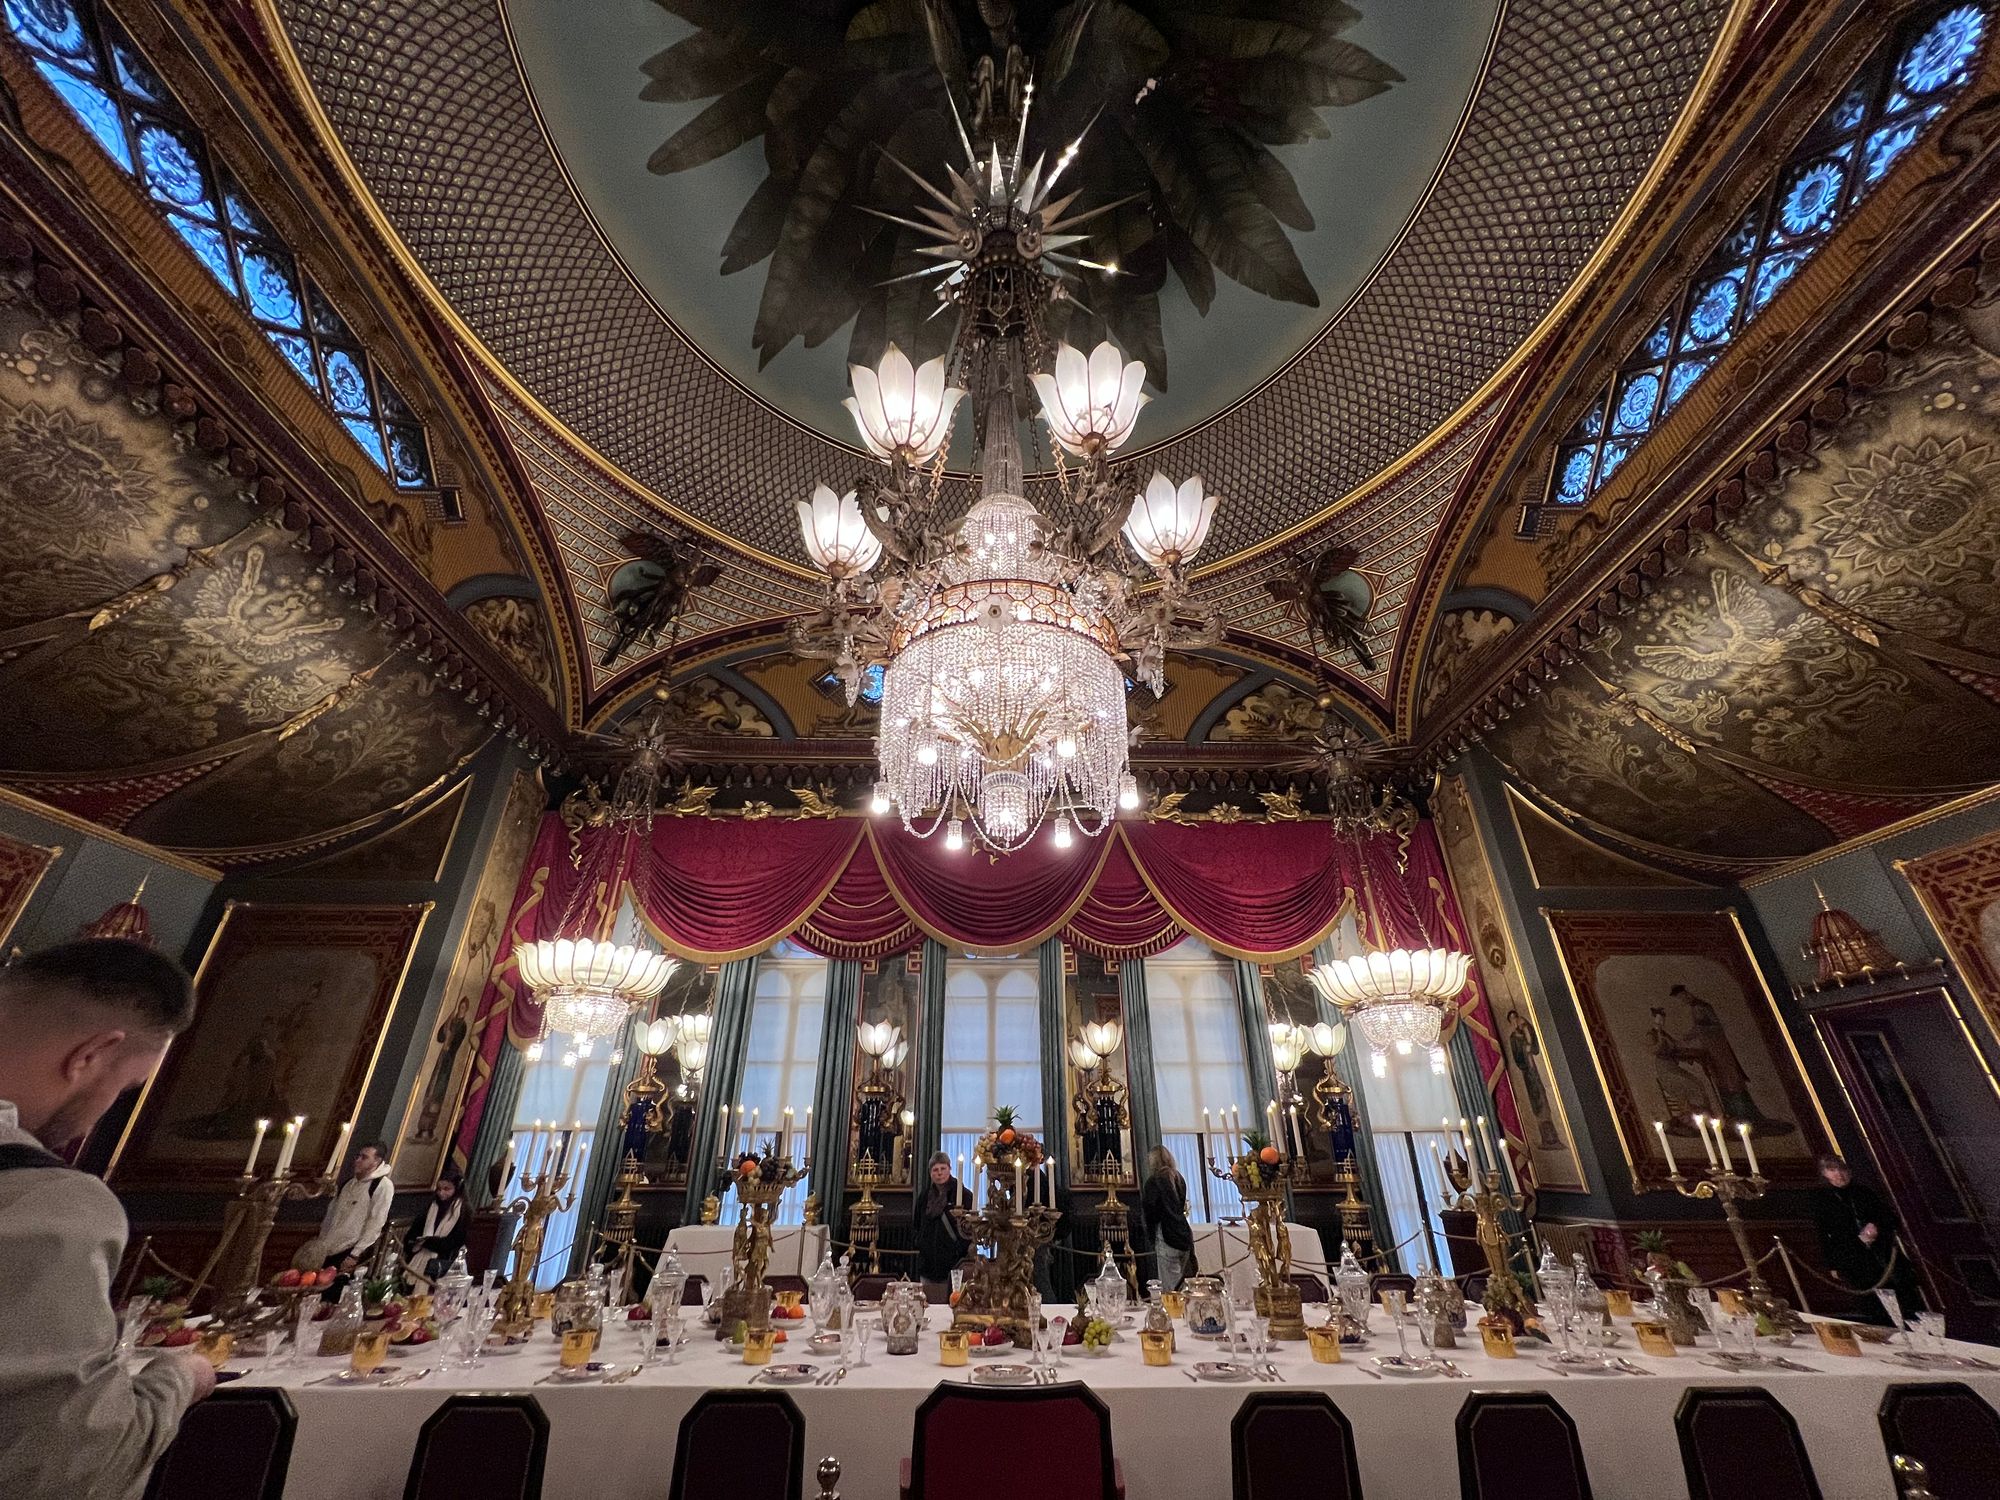 A large dining room with a domed ceiling (from which hands the chandelier in the header image). There are additional chandeliers at each corner, red gilded curtains and drapes, and every border and crevice is gilded in some way. The table is long and covered in a white tablecloth, laid out as if for food. Visitors surround the table.